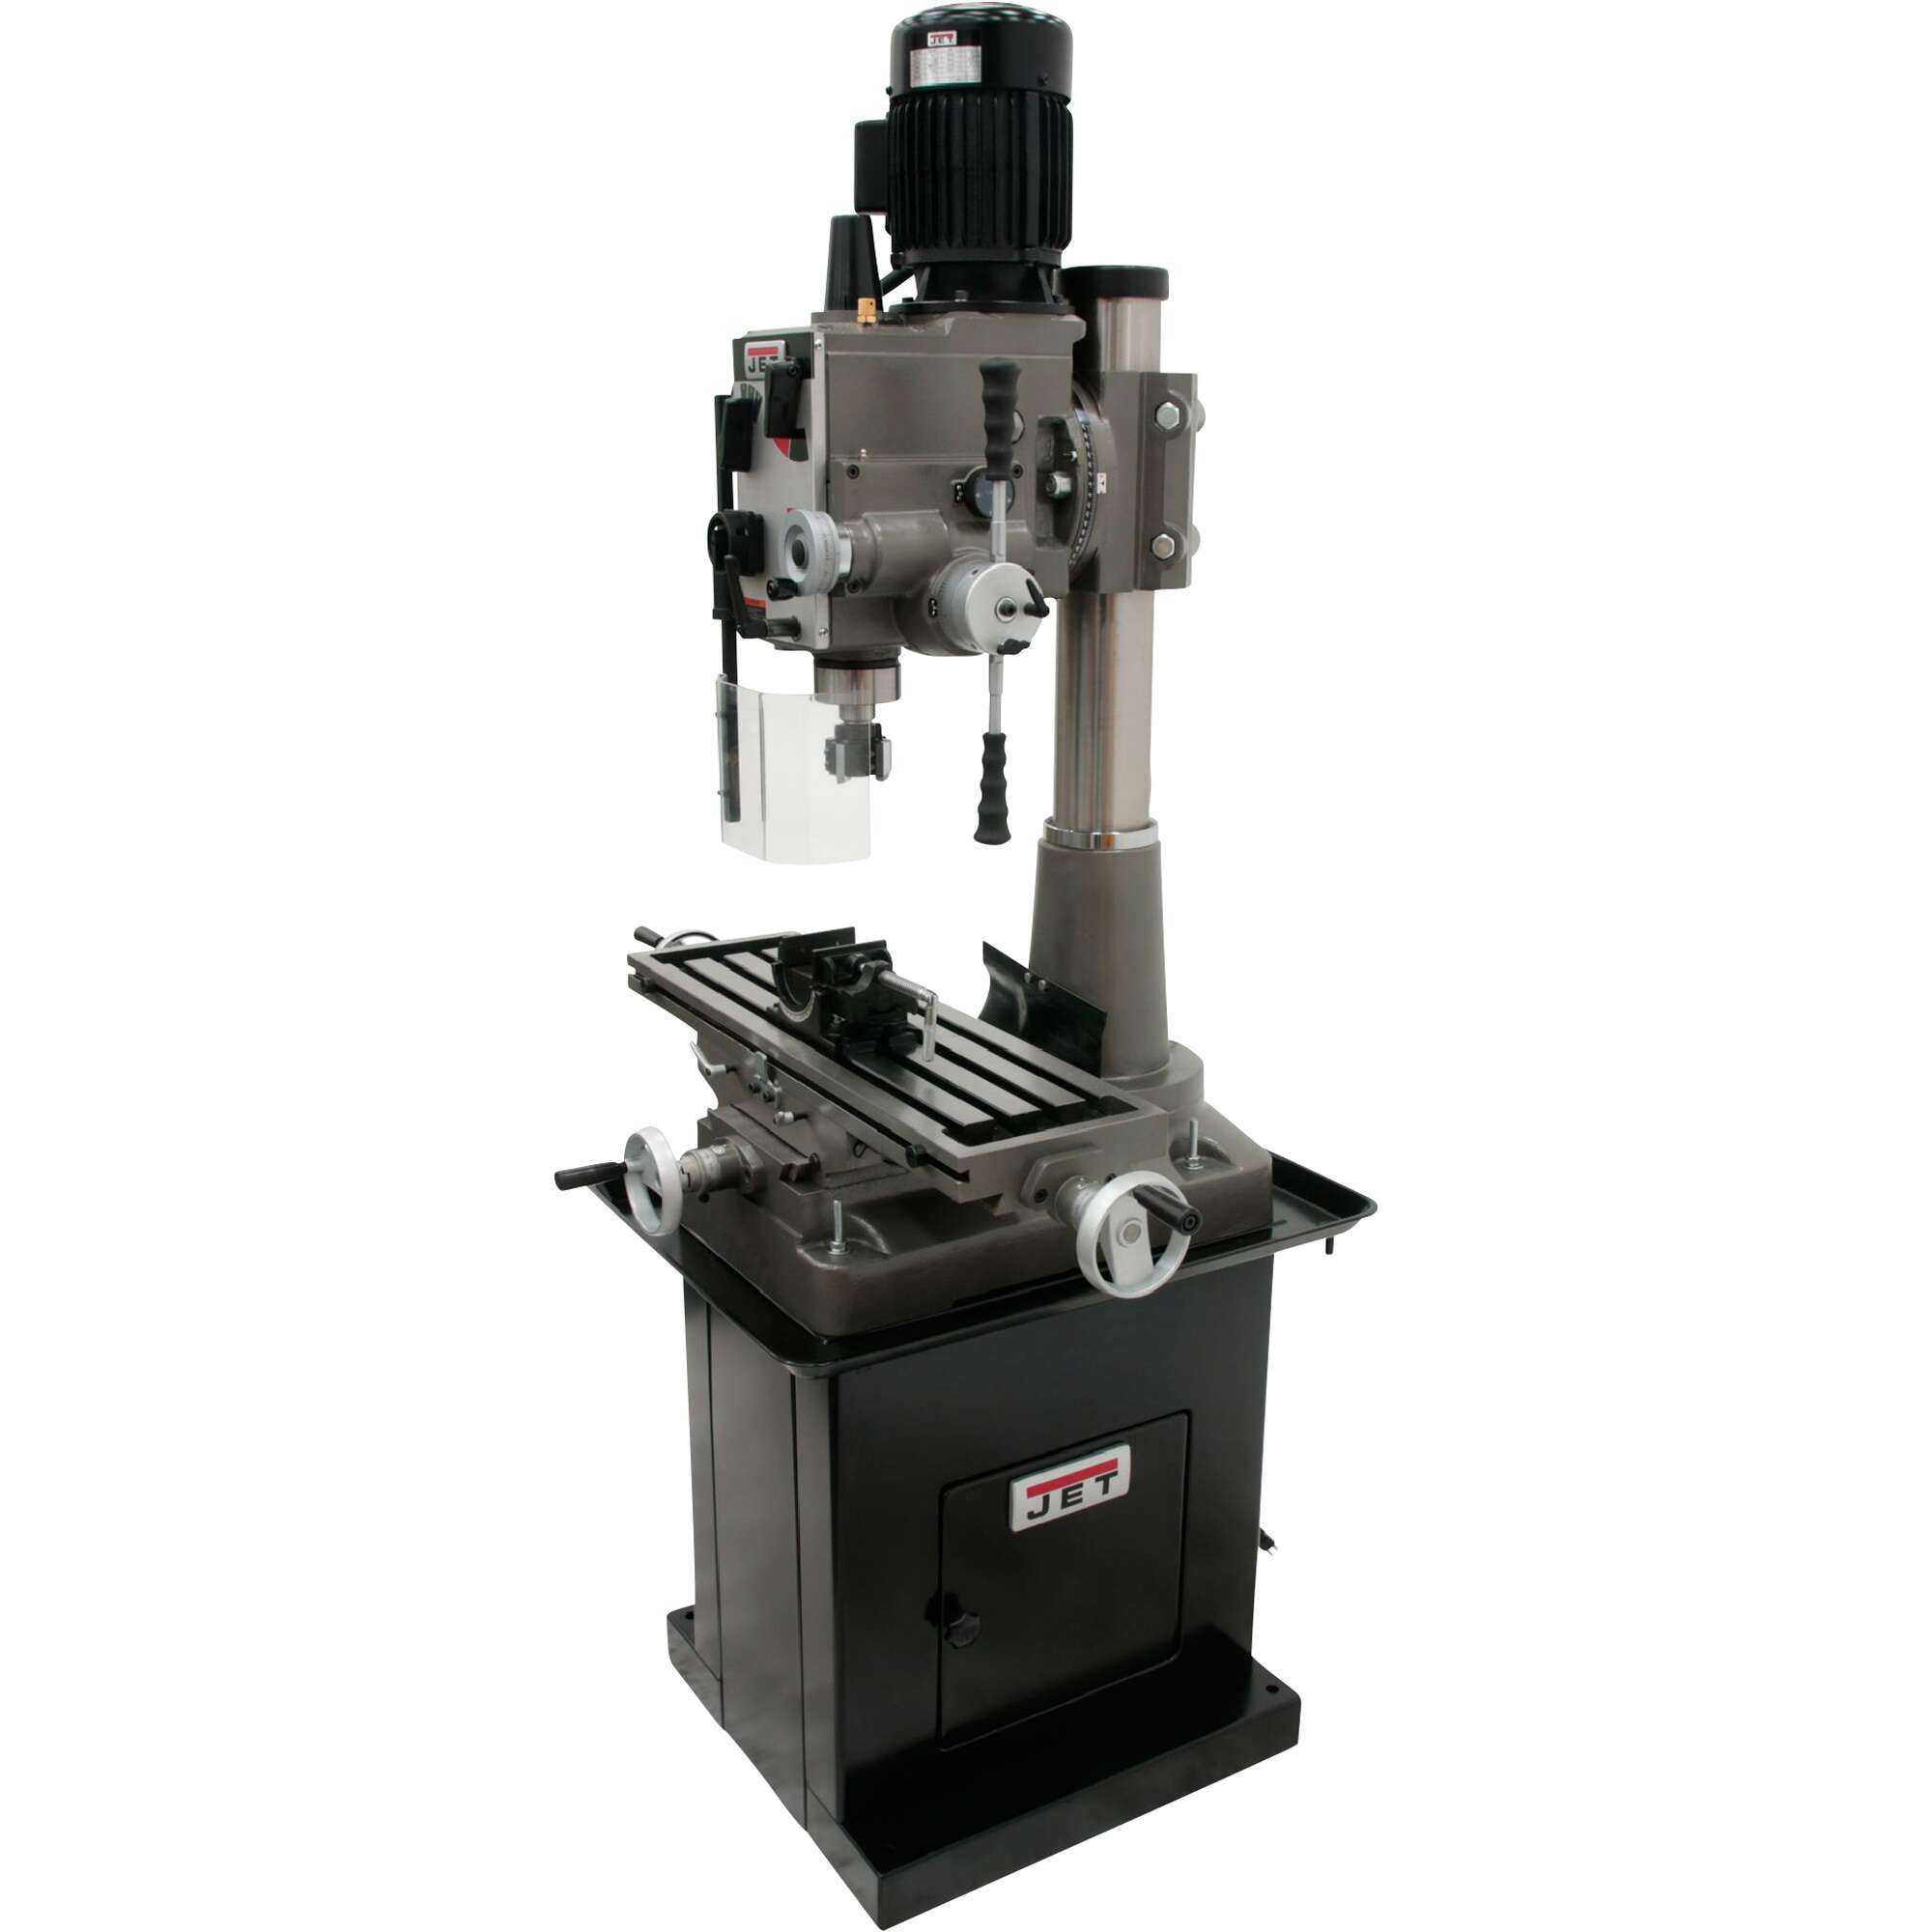 JET Geared Head Square Column Mill Drill with Power Downfeed HP 115  230V Primadian Tools